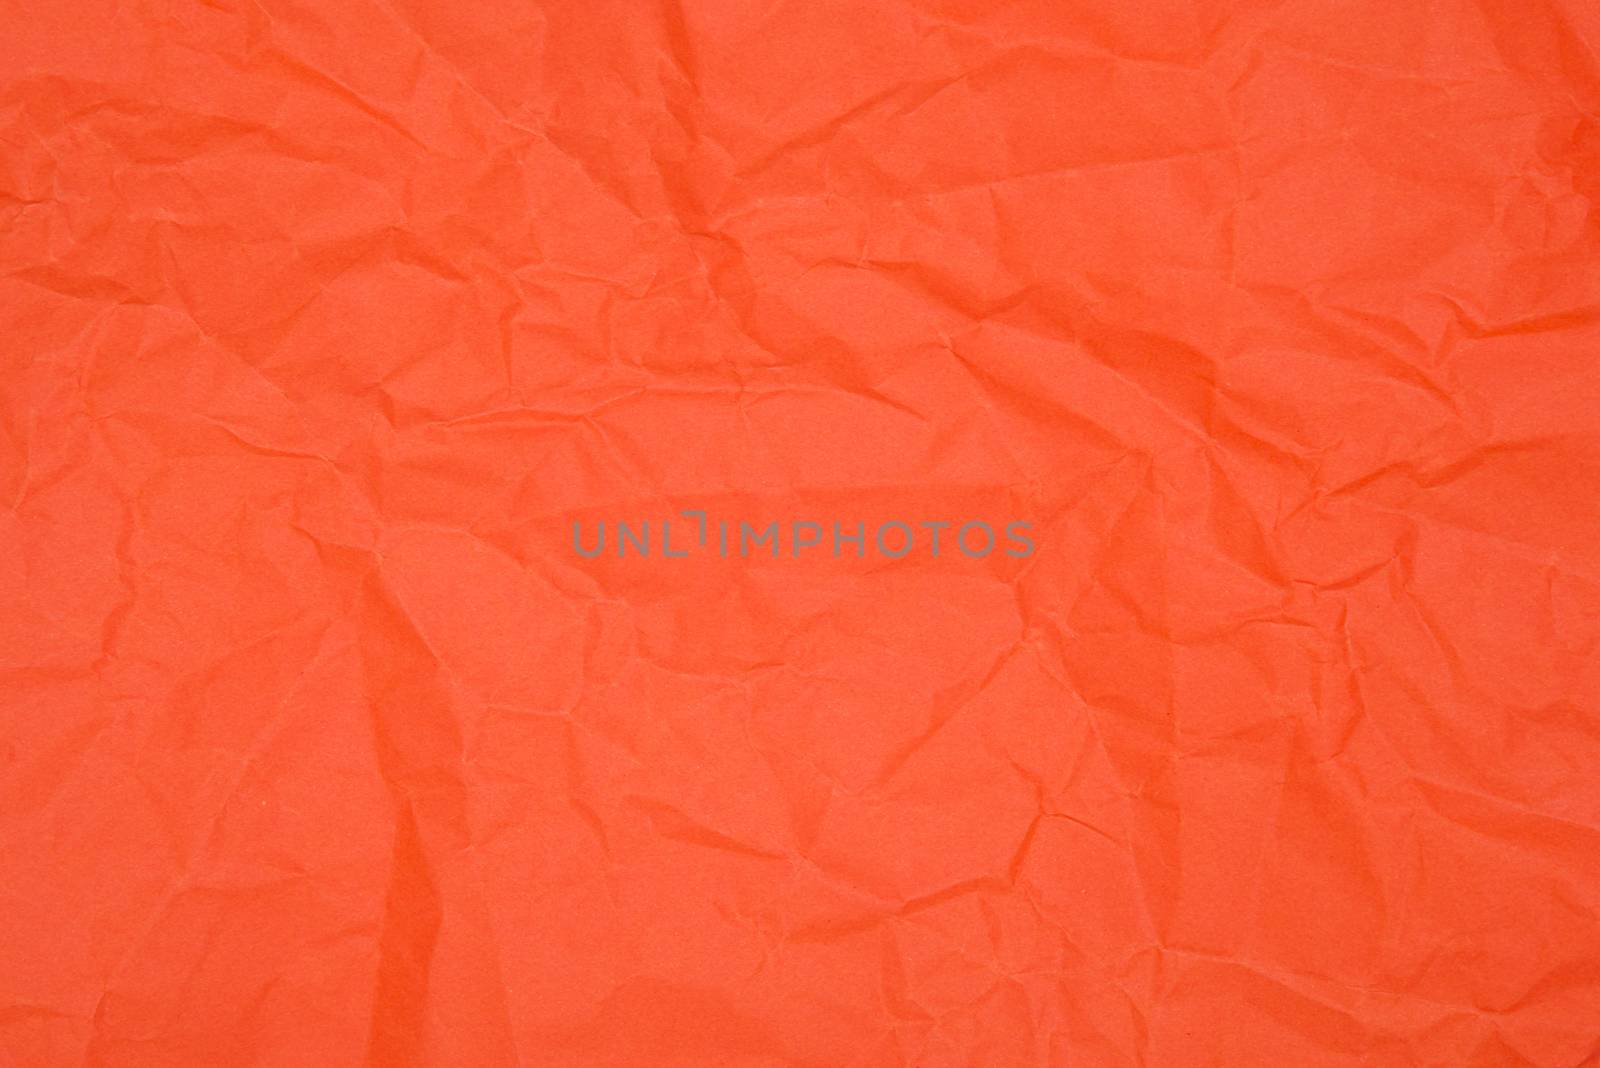 Red crumpled paper as texture, close up image